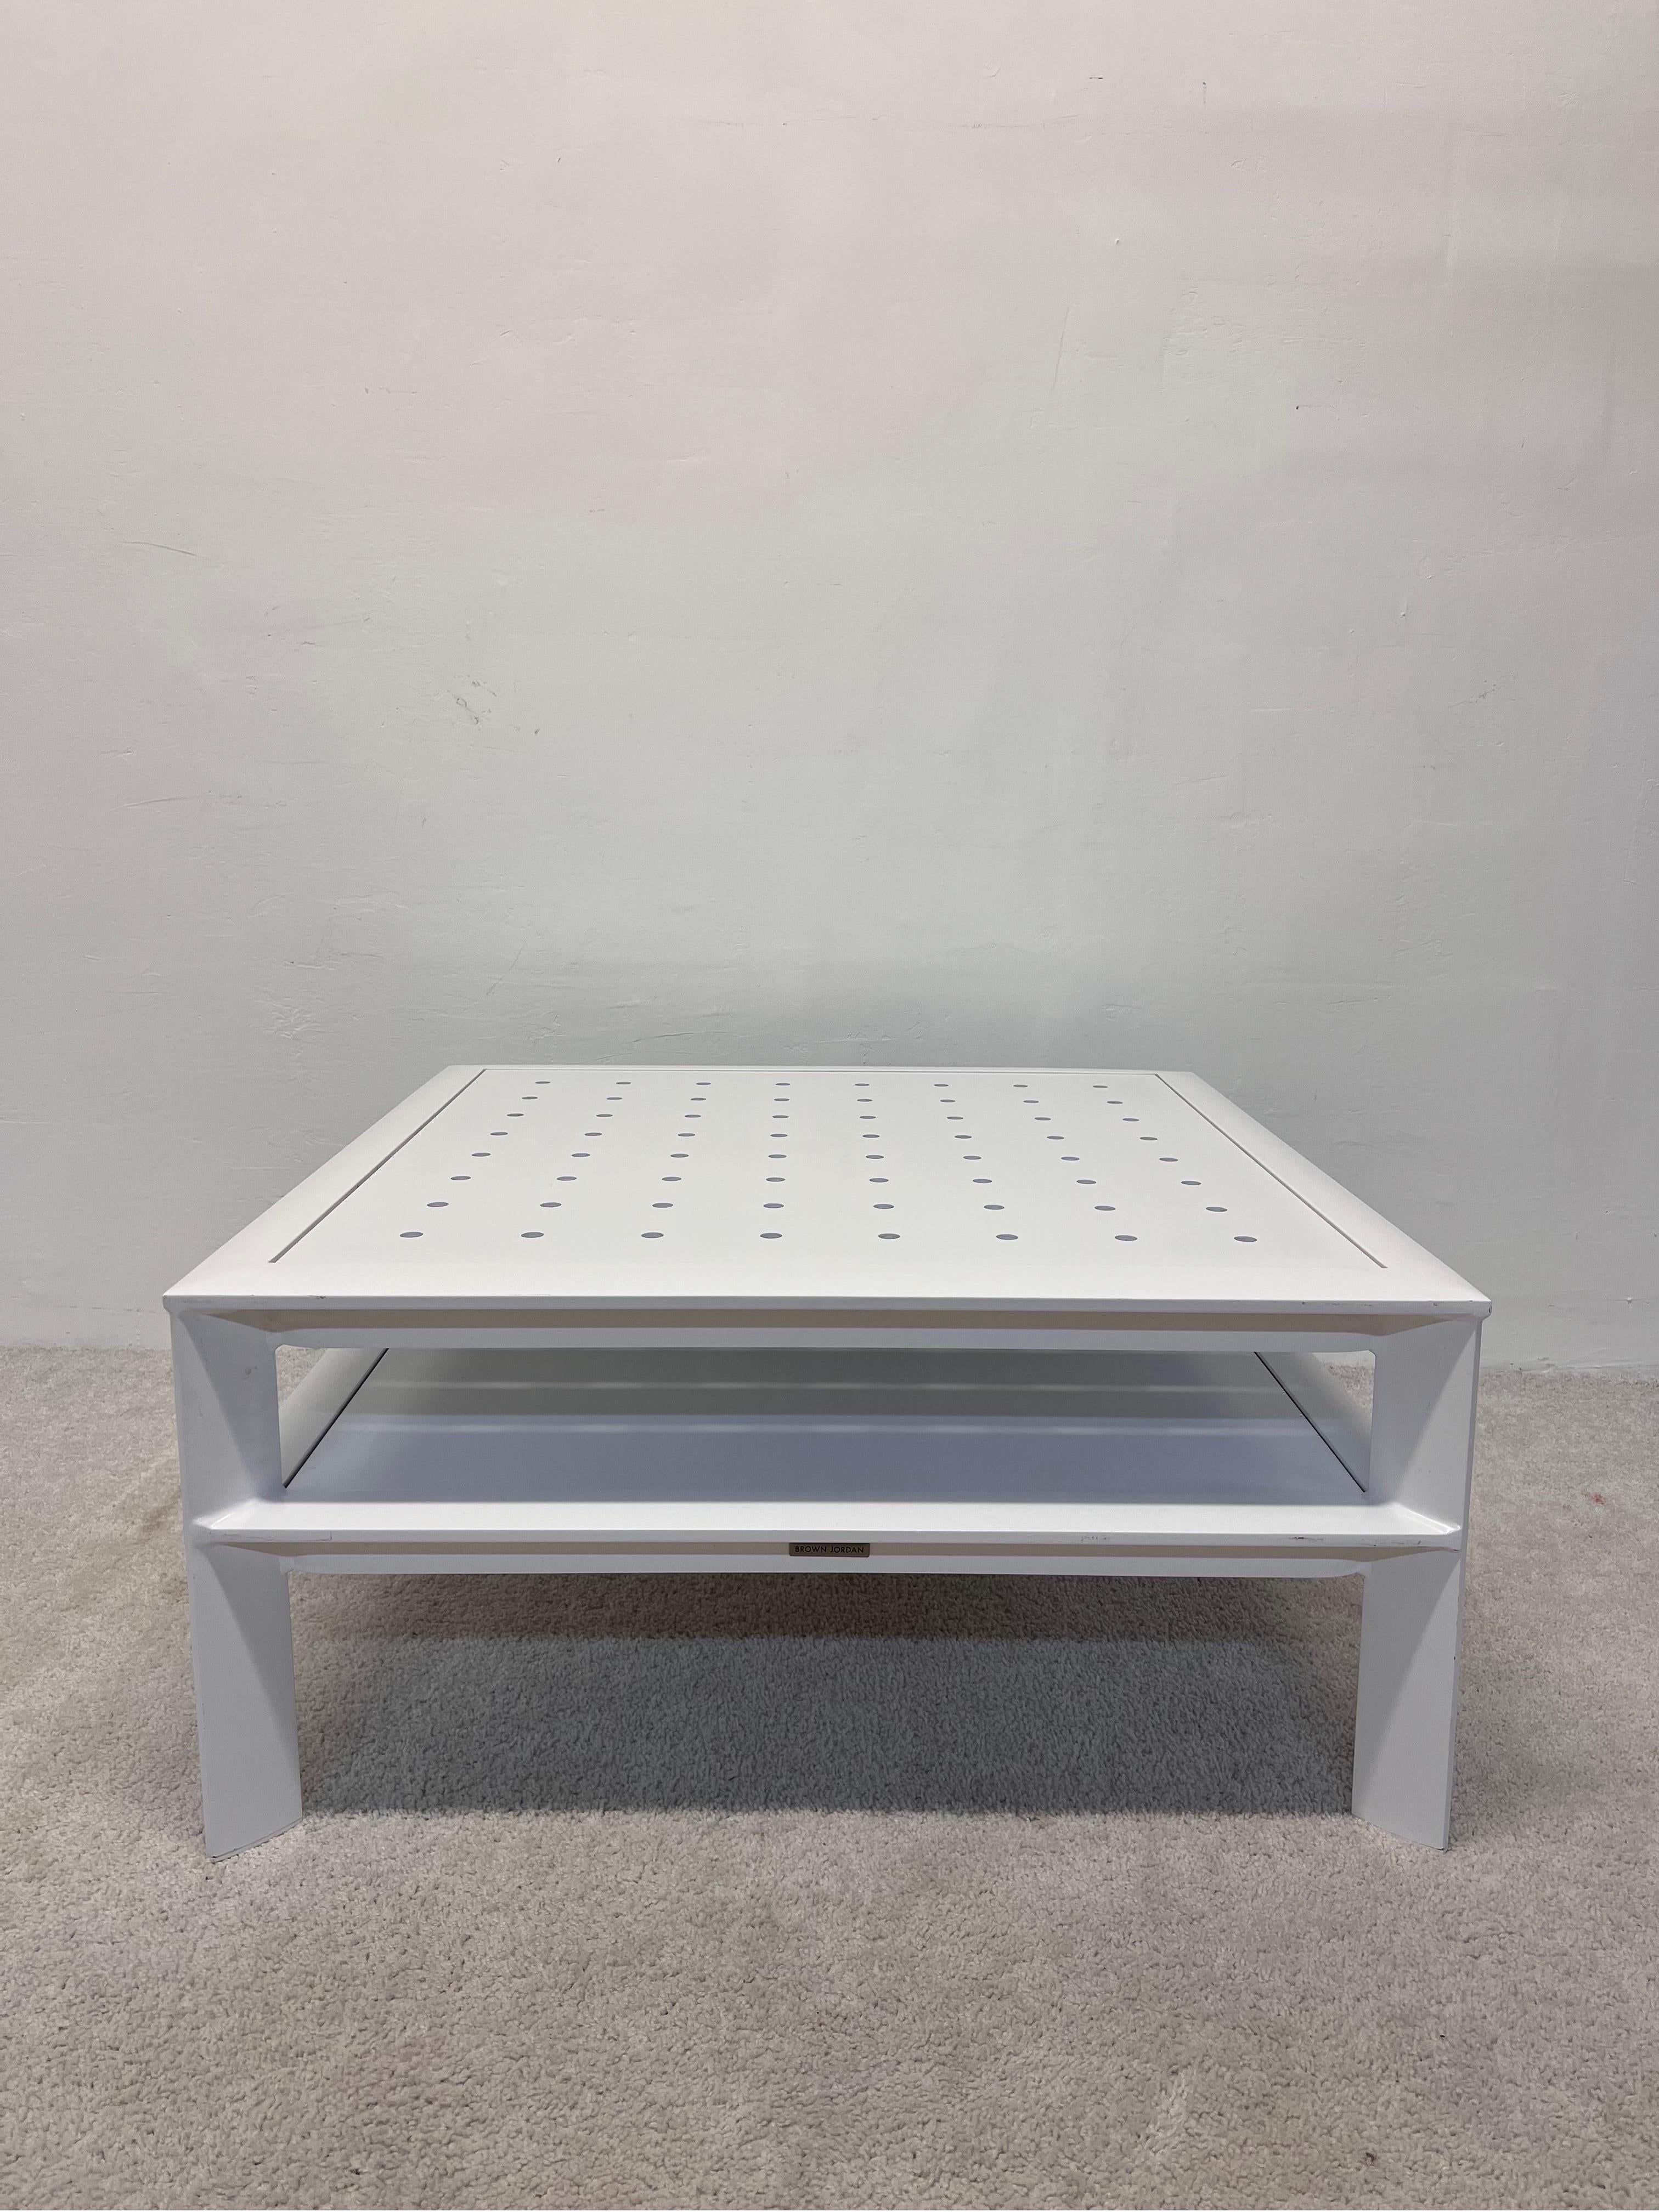 White powder-coated aluminum outdoor coffee or cocktail table with perforated top and lower shelf by John Caldwell for Brown Jordan.

We have two tables available.  Please see our other listings for second table and contact if a combined shipping